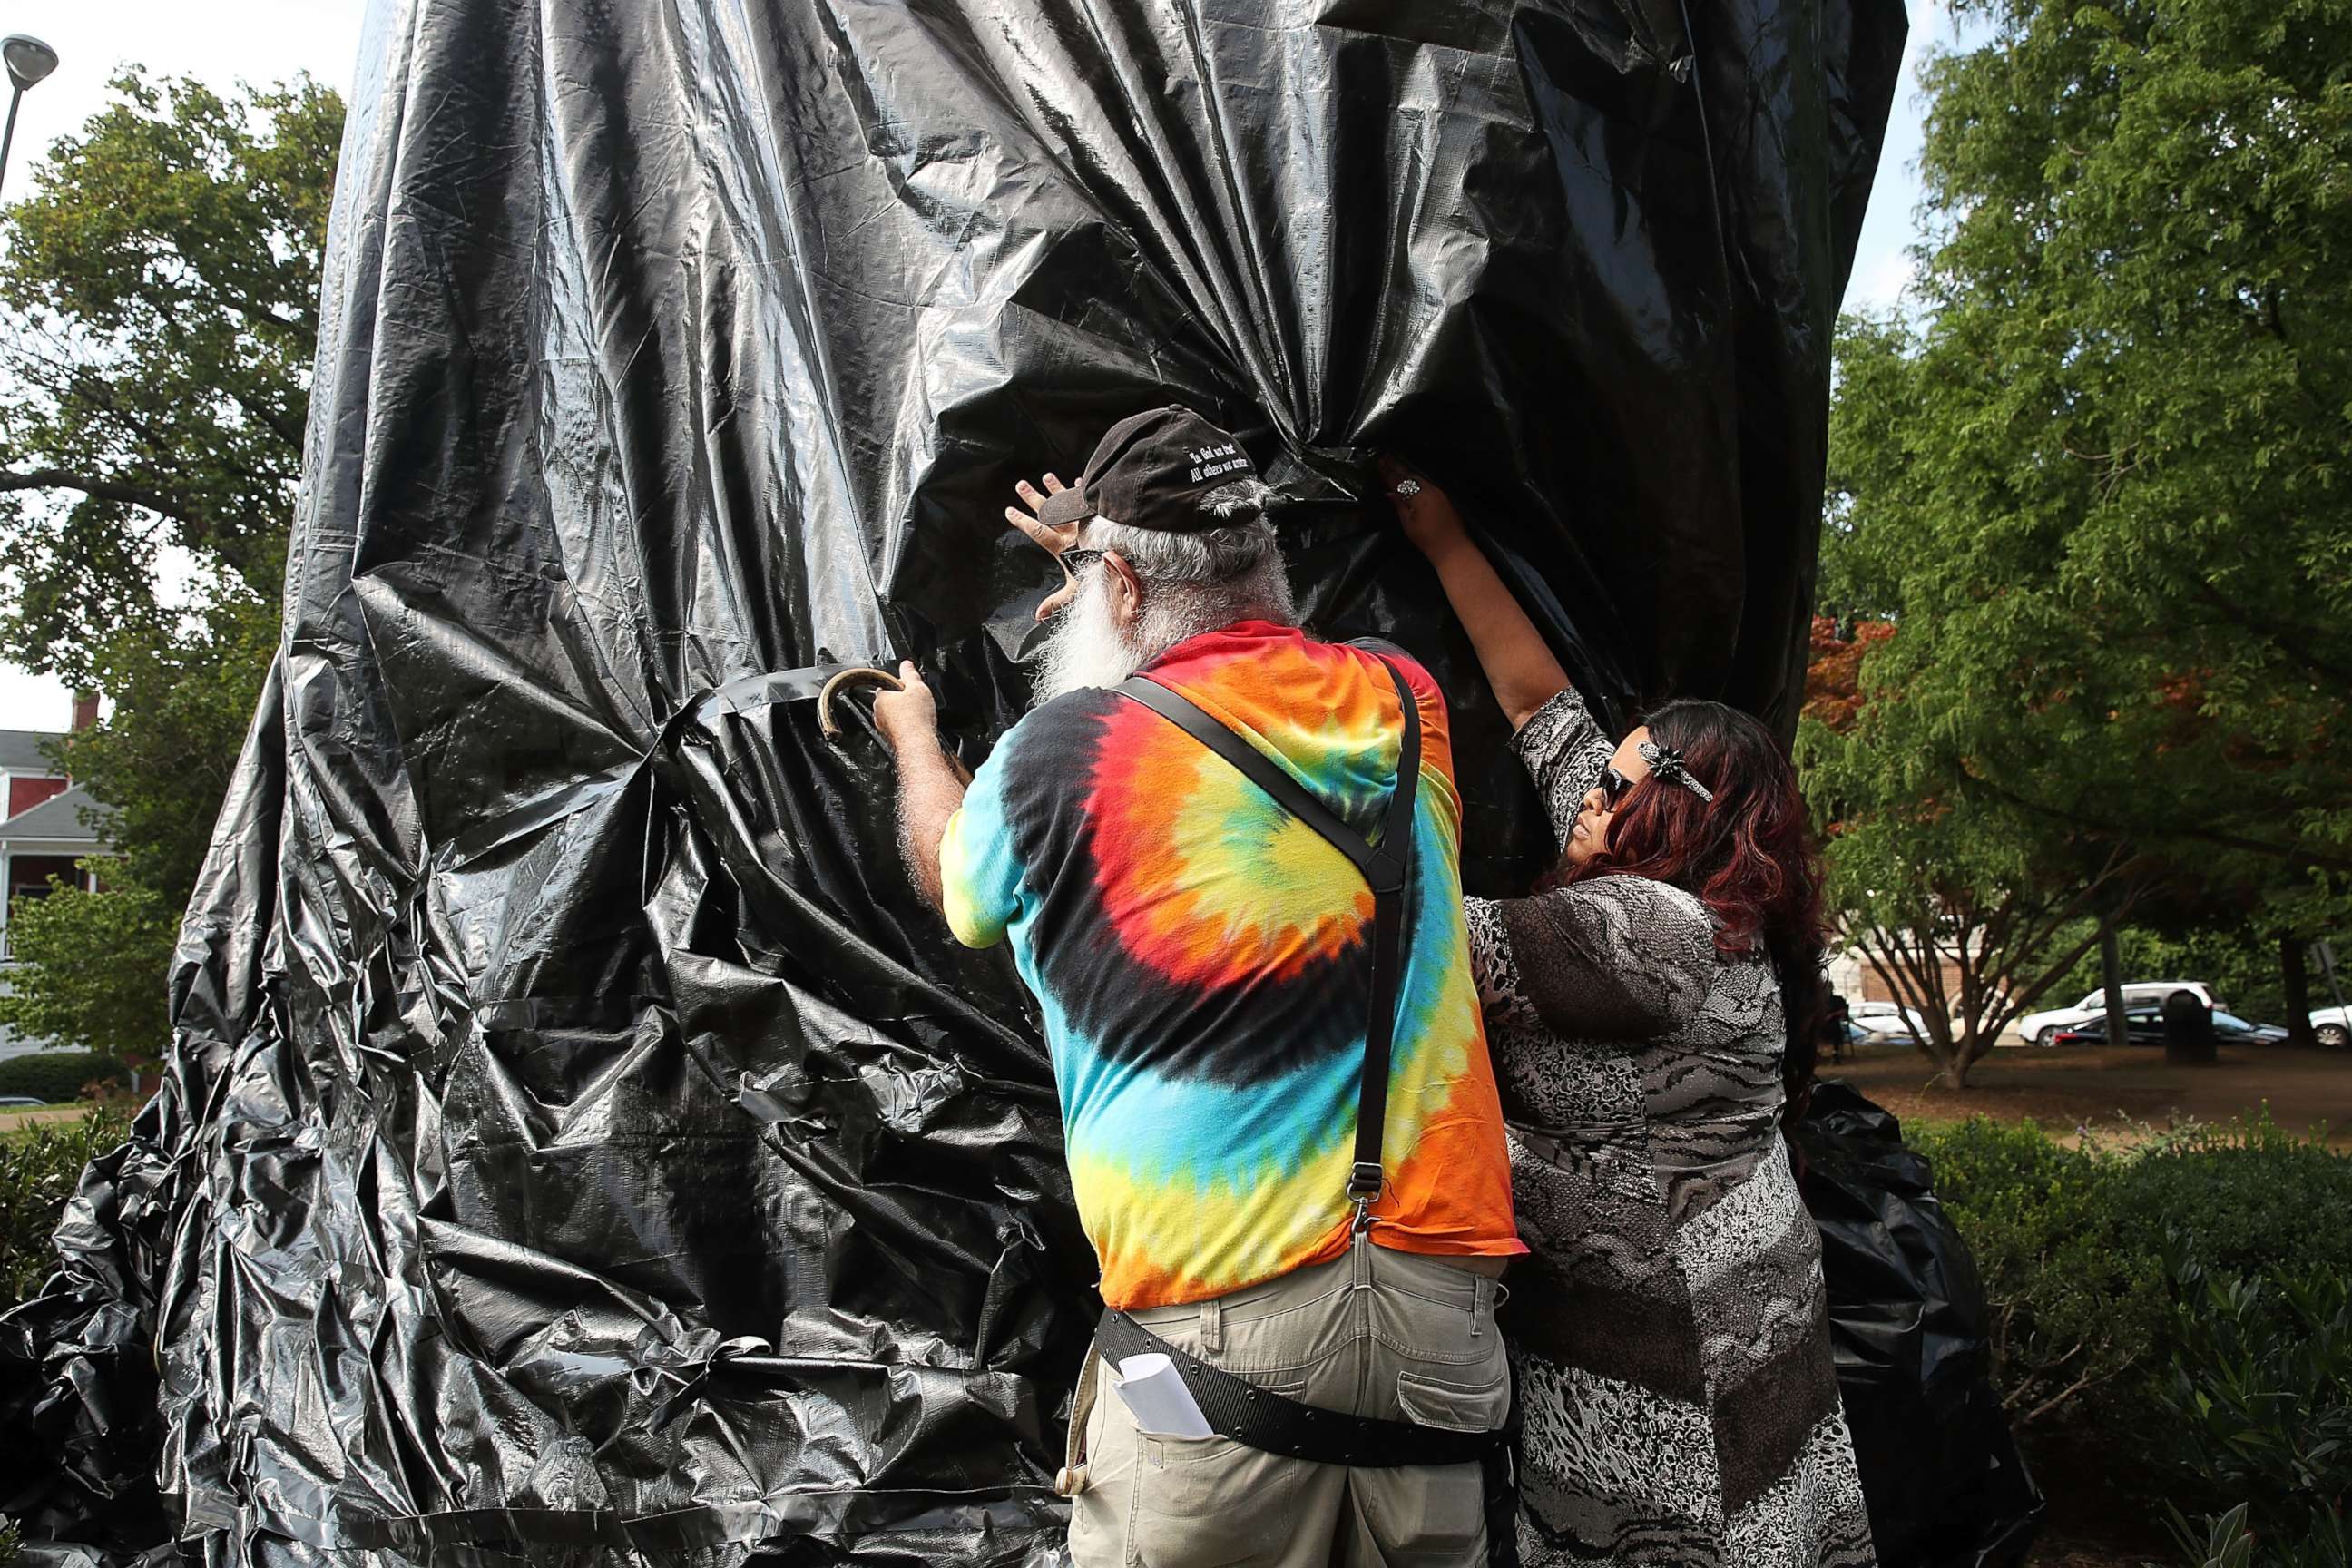 PHOTO: A women tries to stop John Miska from cutting off the black tarp that was put over the statue of Confederate Gen. Robert E. Lee that stands in the center of Emancipation Park, formerly Lee Park, on Aug. 23, 2017 in Charlottesville, Va.